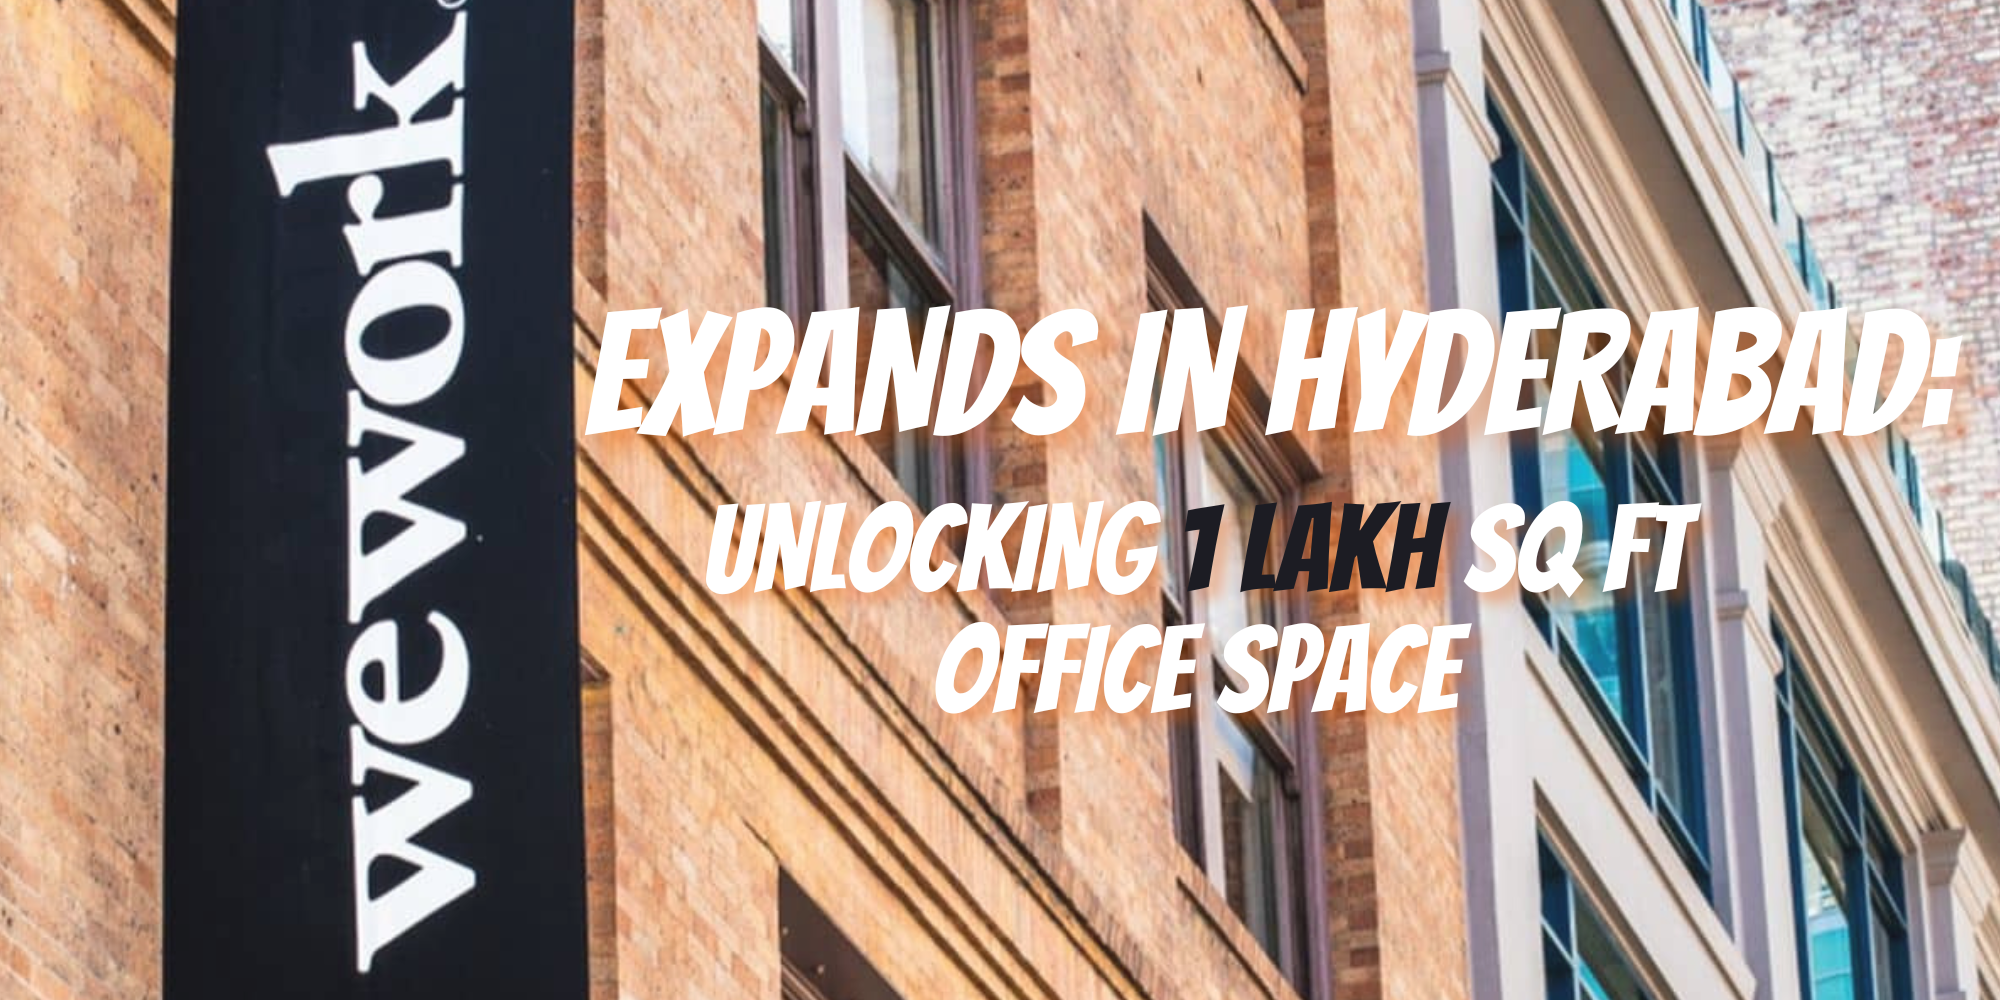 WeWork India Expands in Hyderabad: Unlocking 1 Lakh Sq Ft Office Space